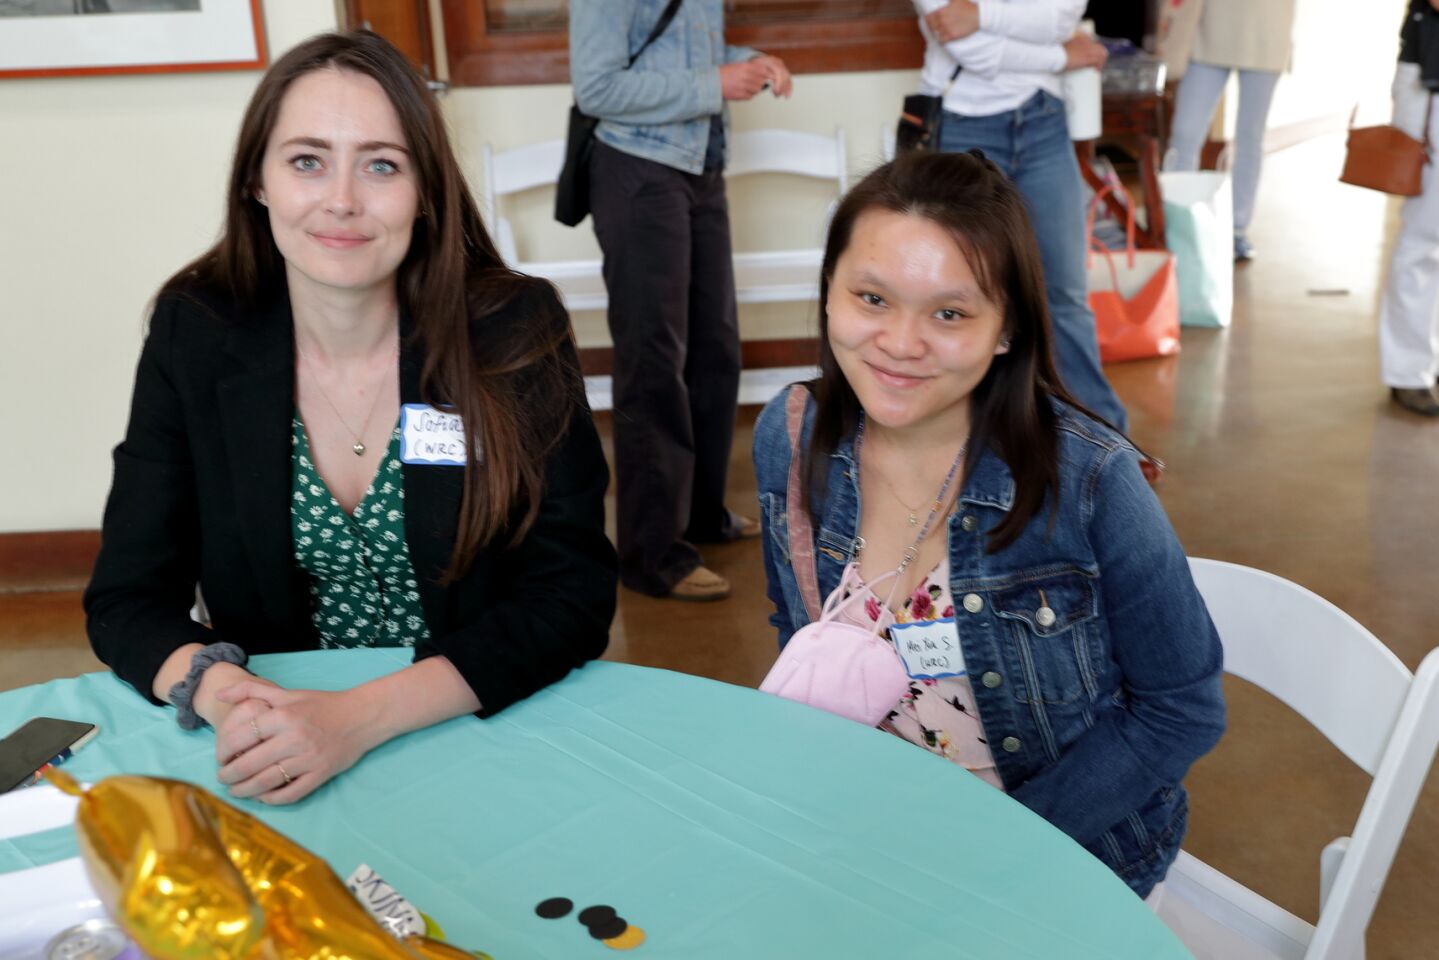 Sofia Hughes and Mei Xia Stanley representing the Women's Resource Center